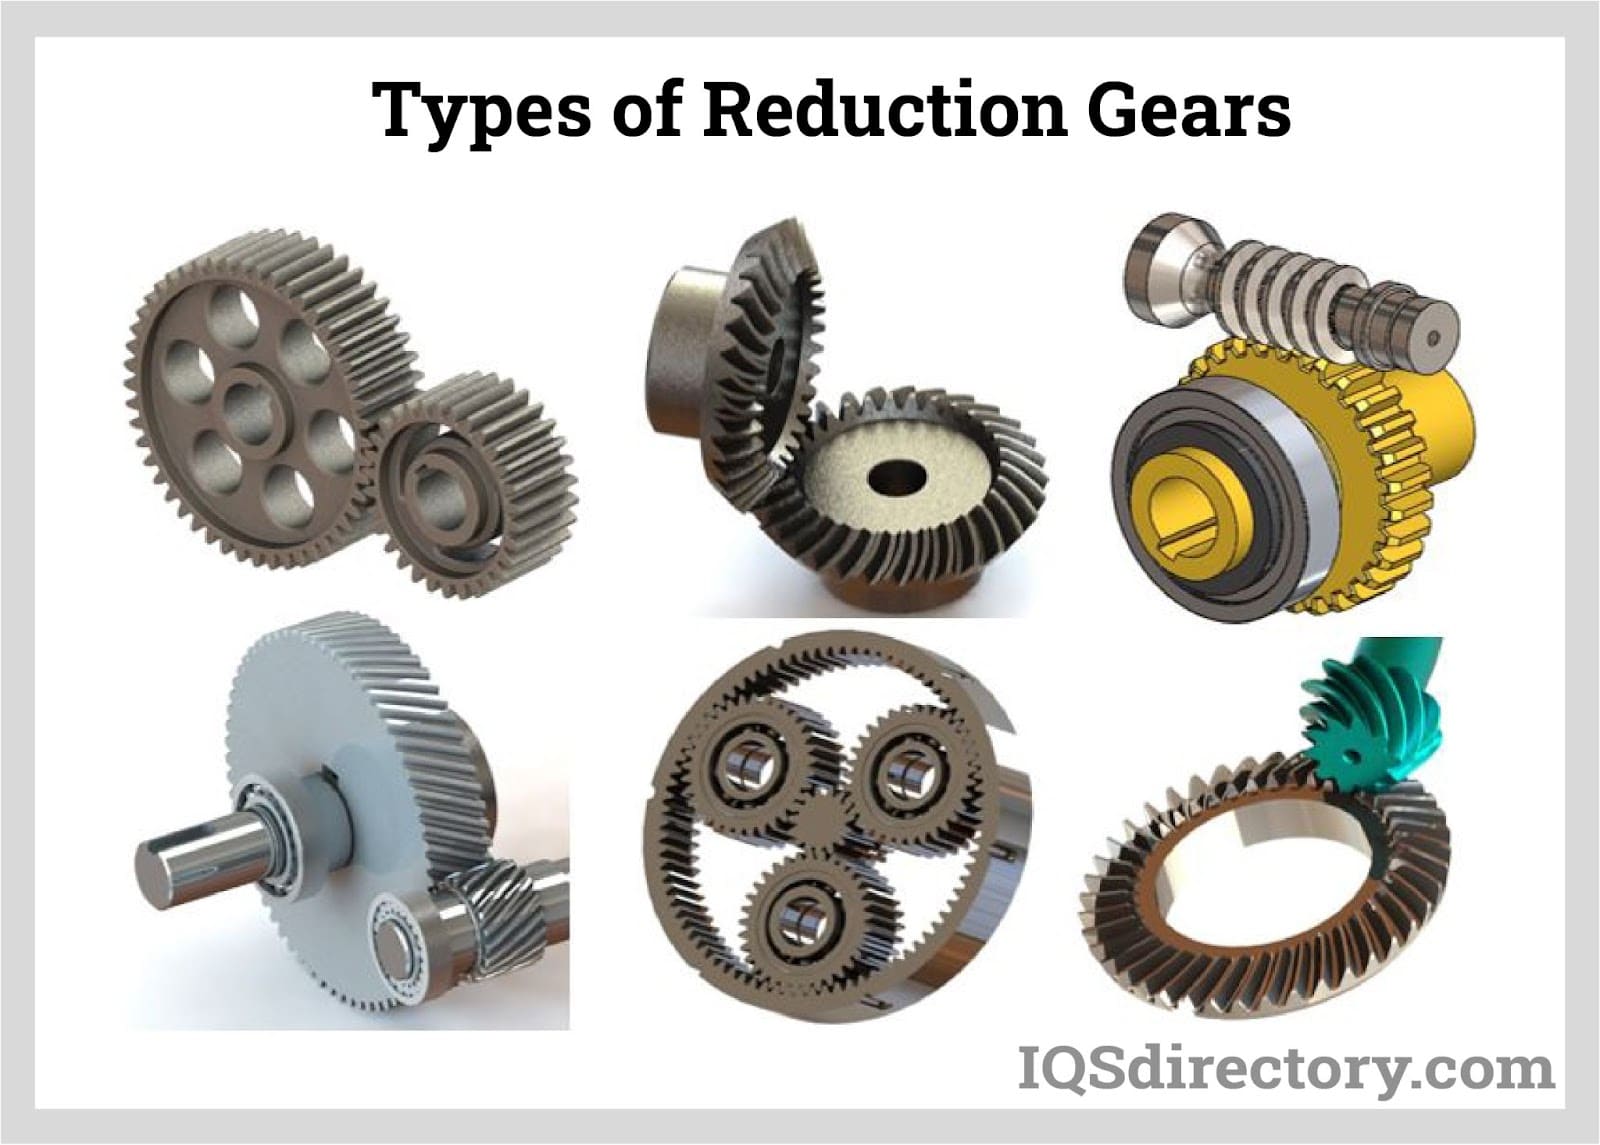 https://www.iqsdirectory.com/articles/gearbox/gear-reducers/types-of-reduction-gears.jpg